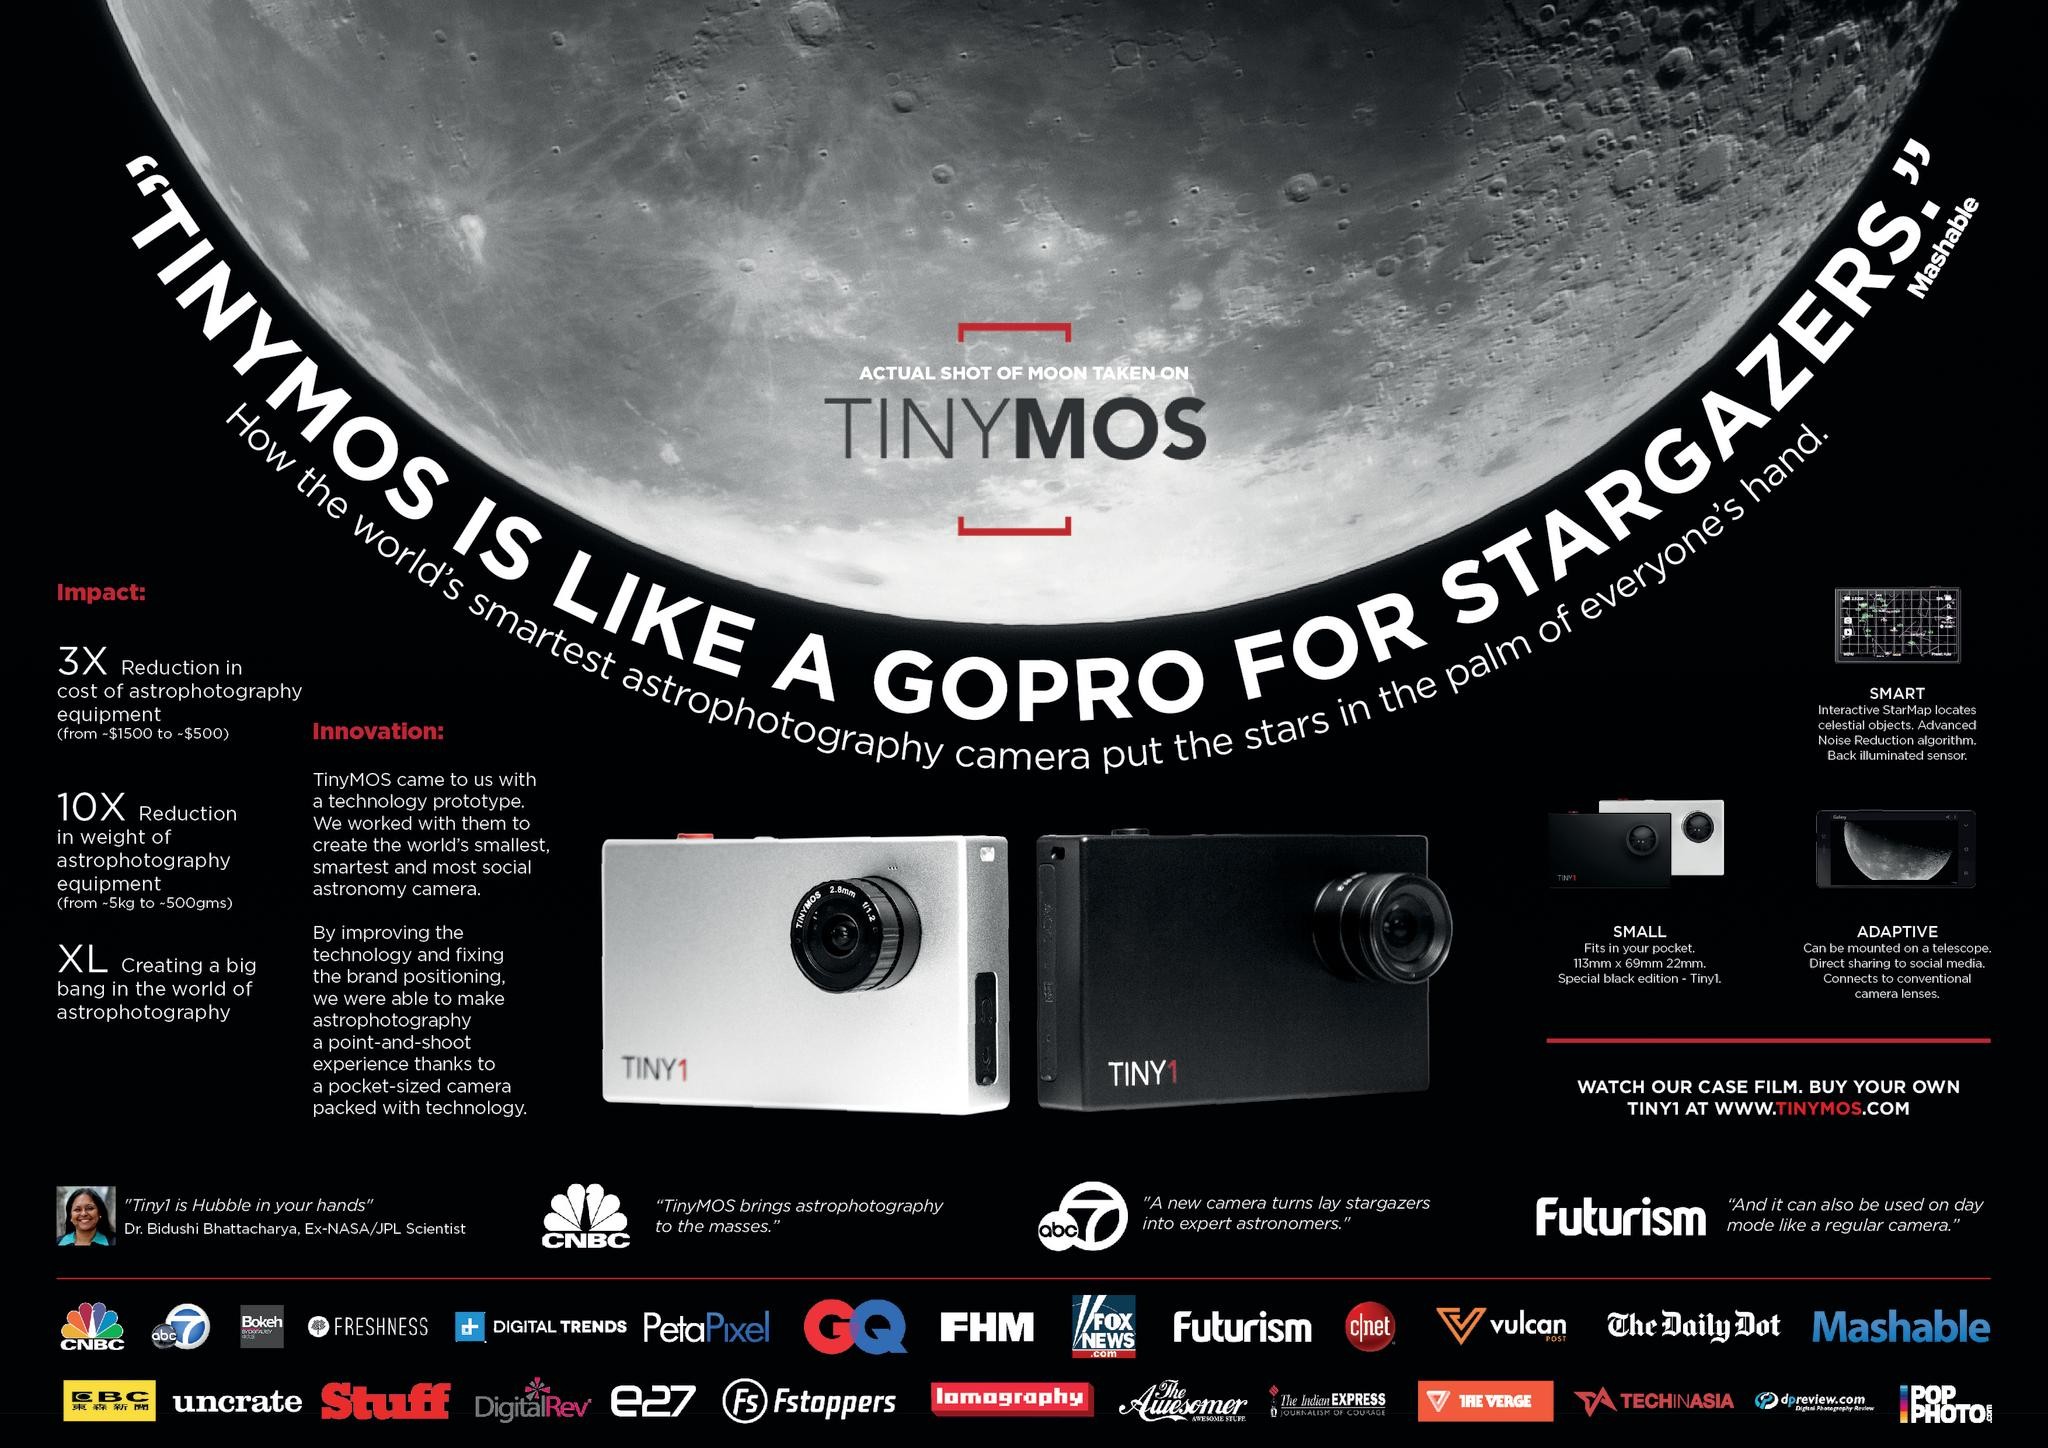 TINYMOS - THE WORLD'S SMARTEST ASTROPHOTOGRAPHY CAMERA